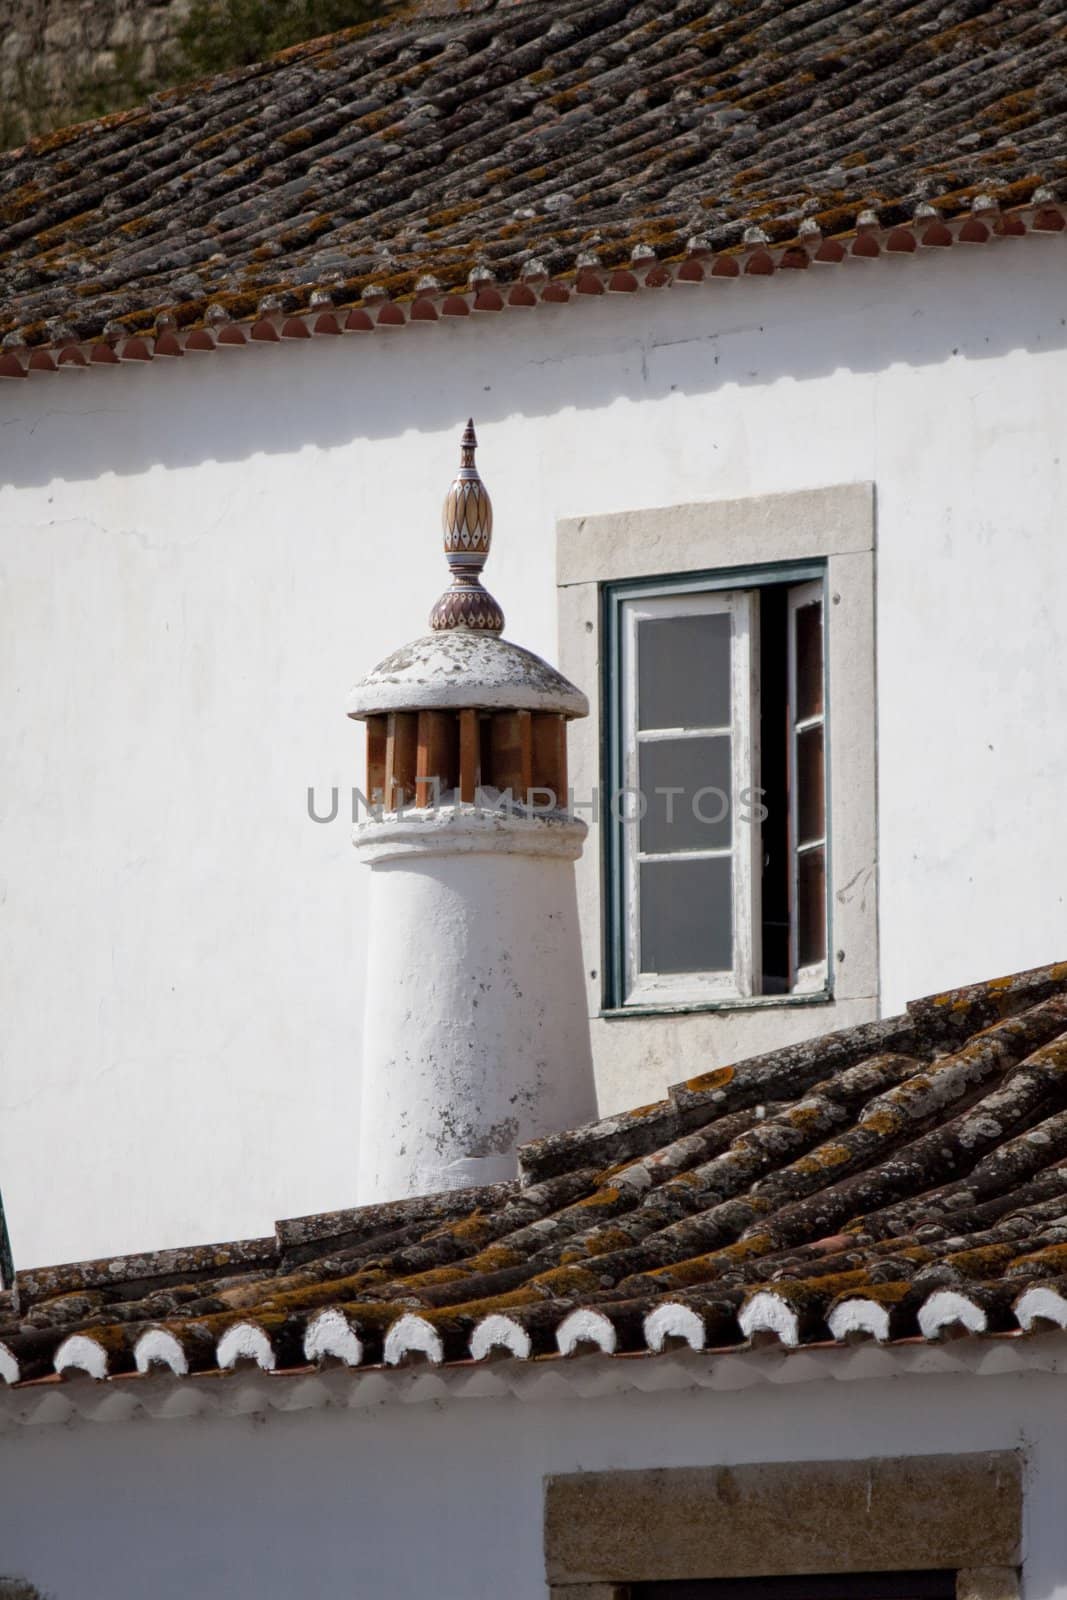 View of a typical portuguese chimney on the rooftops.